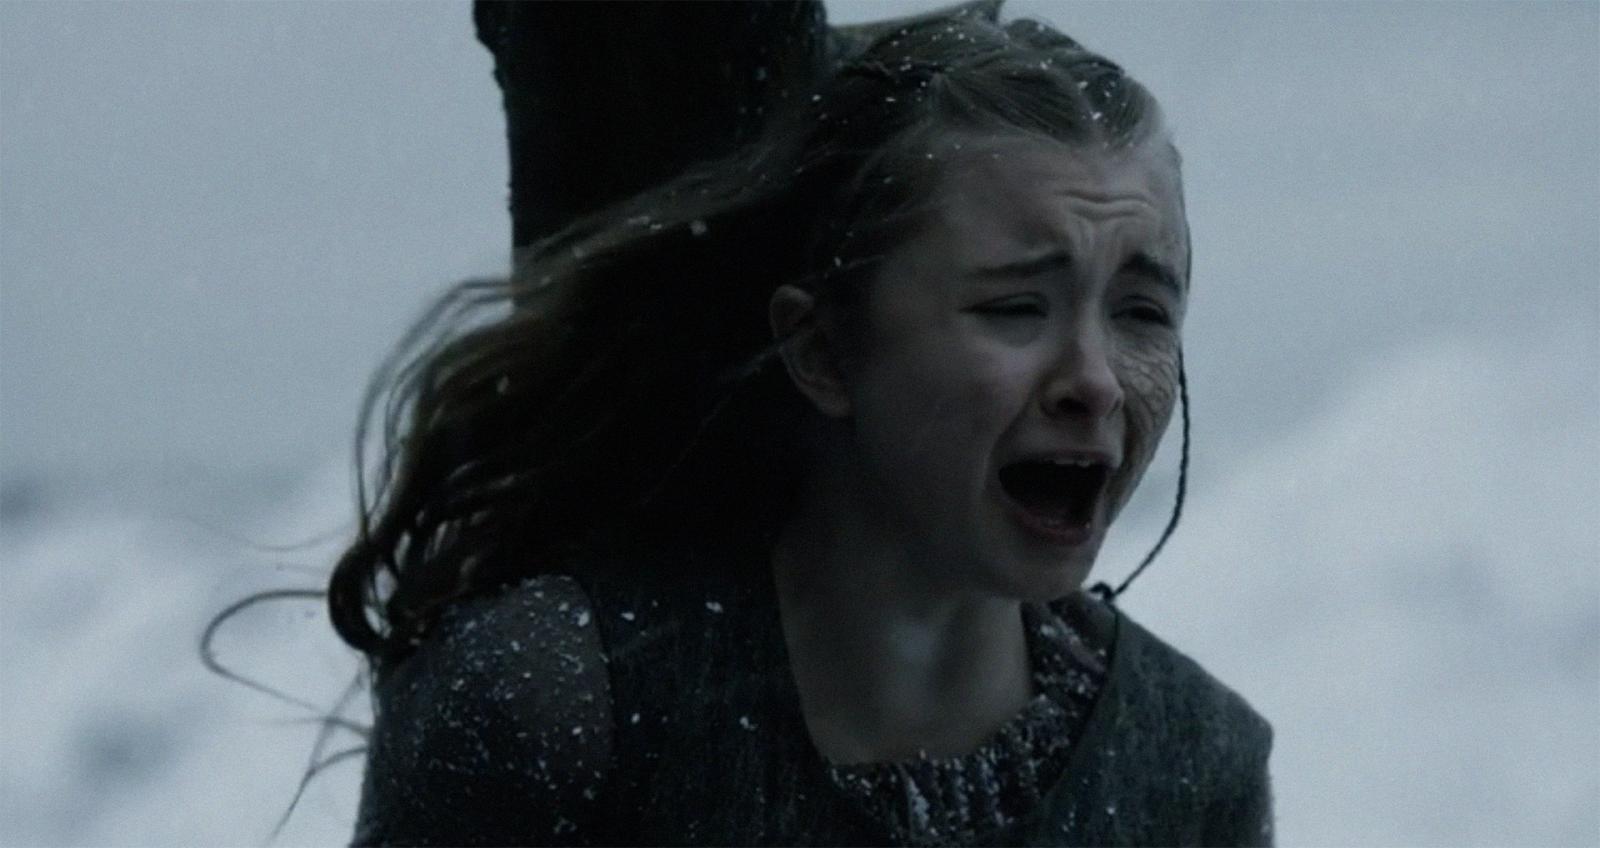 The 5 Most Heartbreaking Game of Thrones Moments That Left Us in Tears - image 1